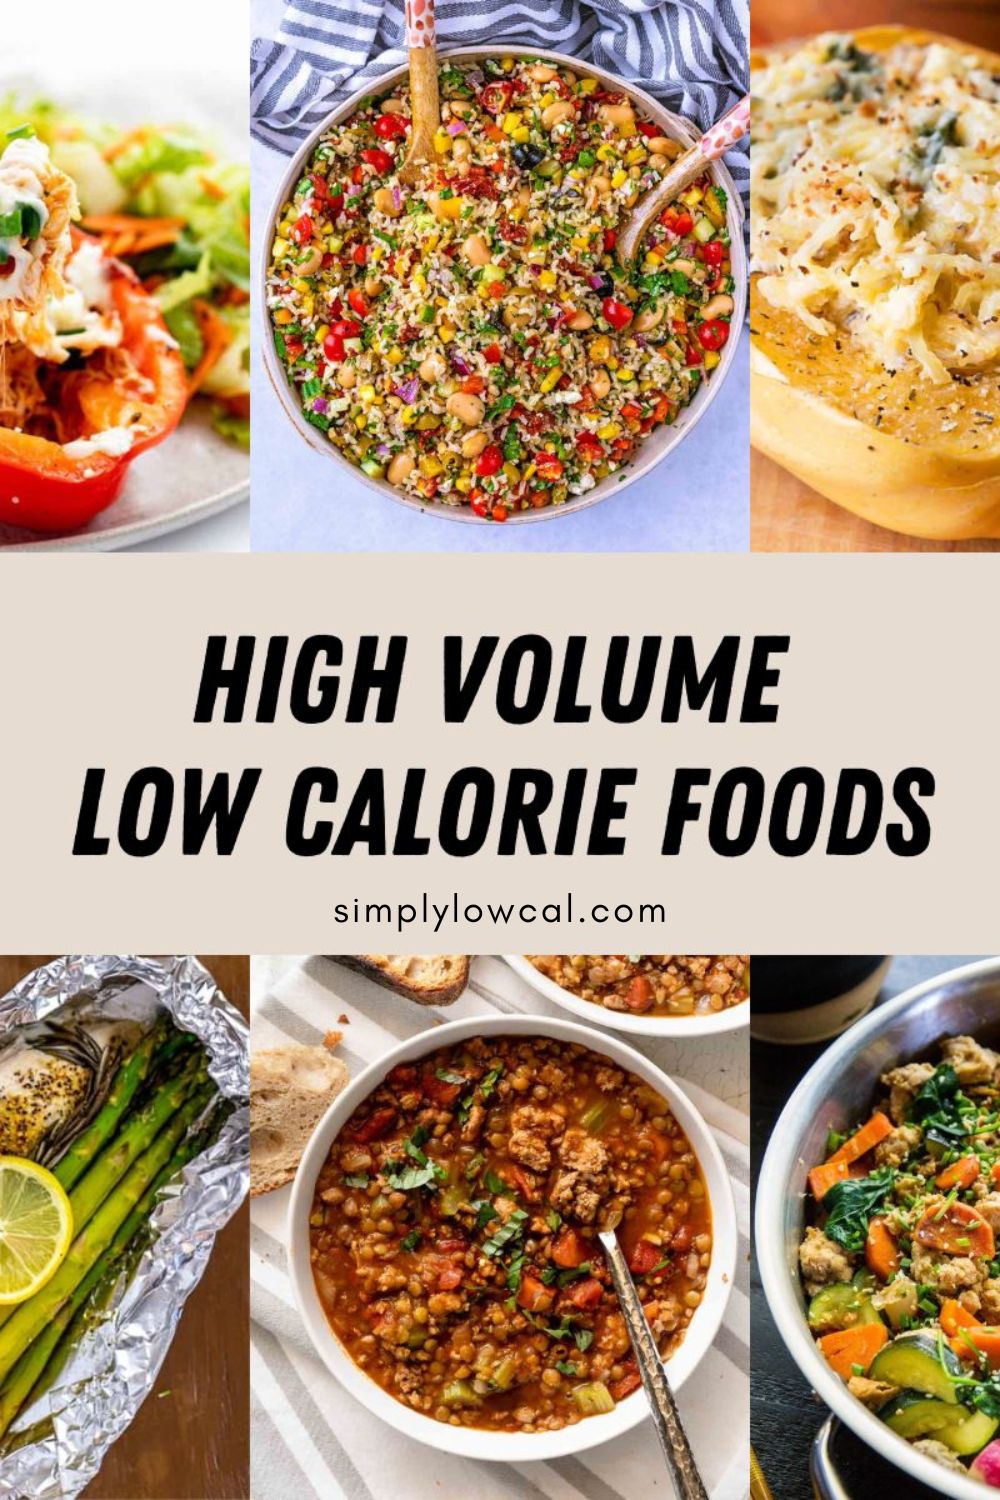 Pinterest pin of high volume low calorie foods.